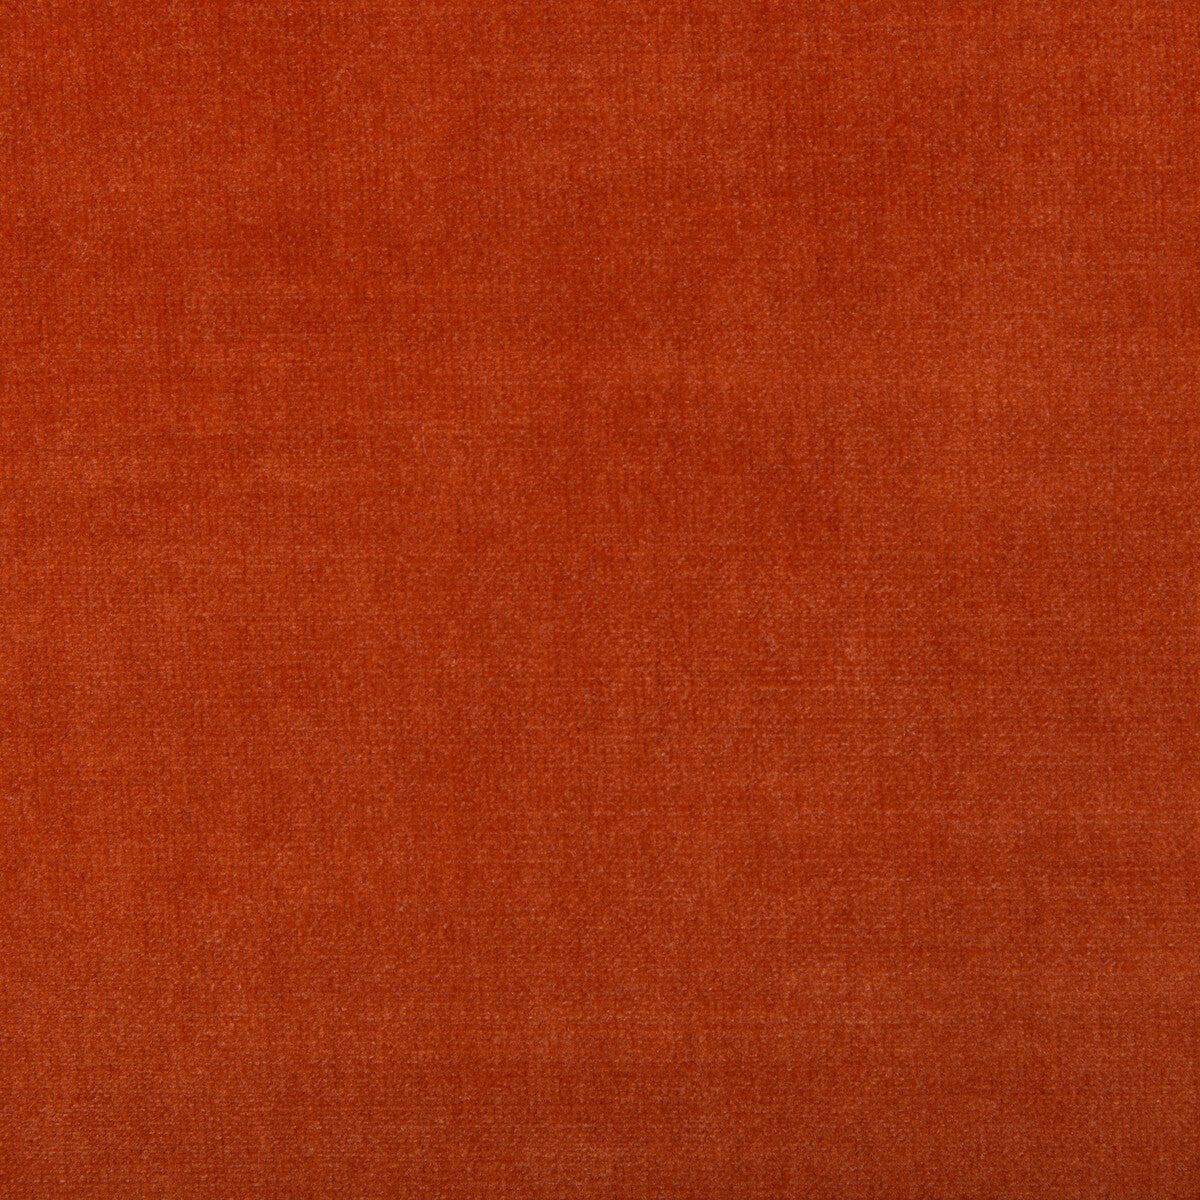 Chessford fabric in paprika color - pattern 35360.212.0 - by Kravet Smart in the Performance collection